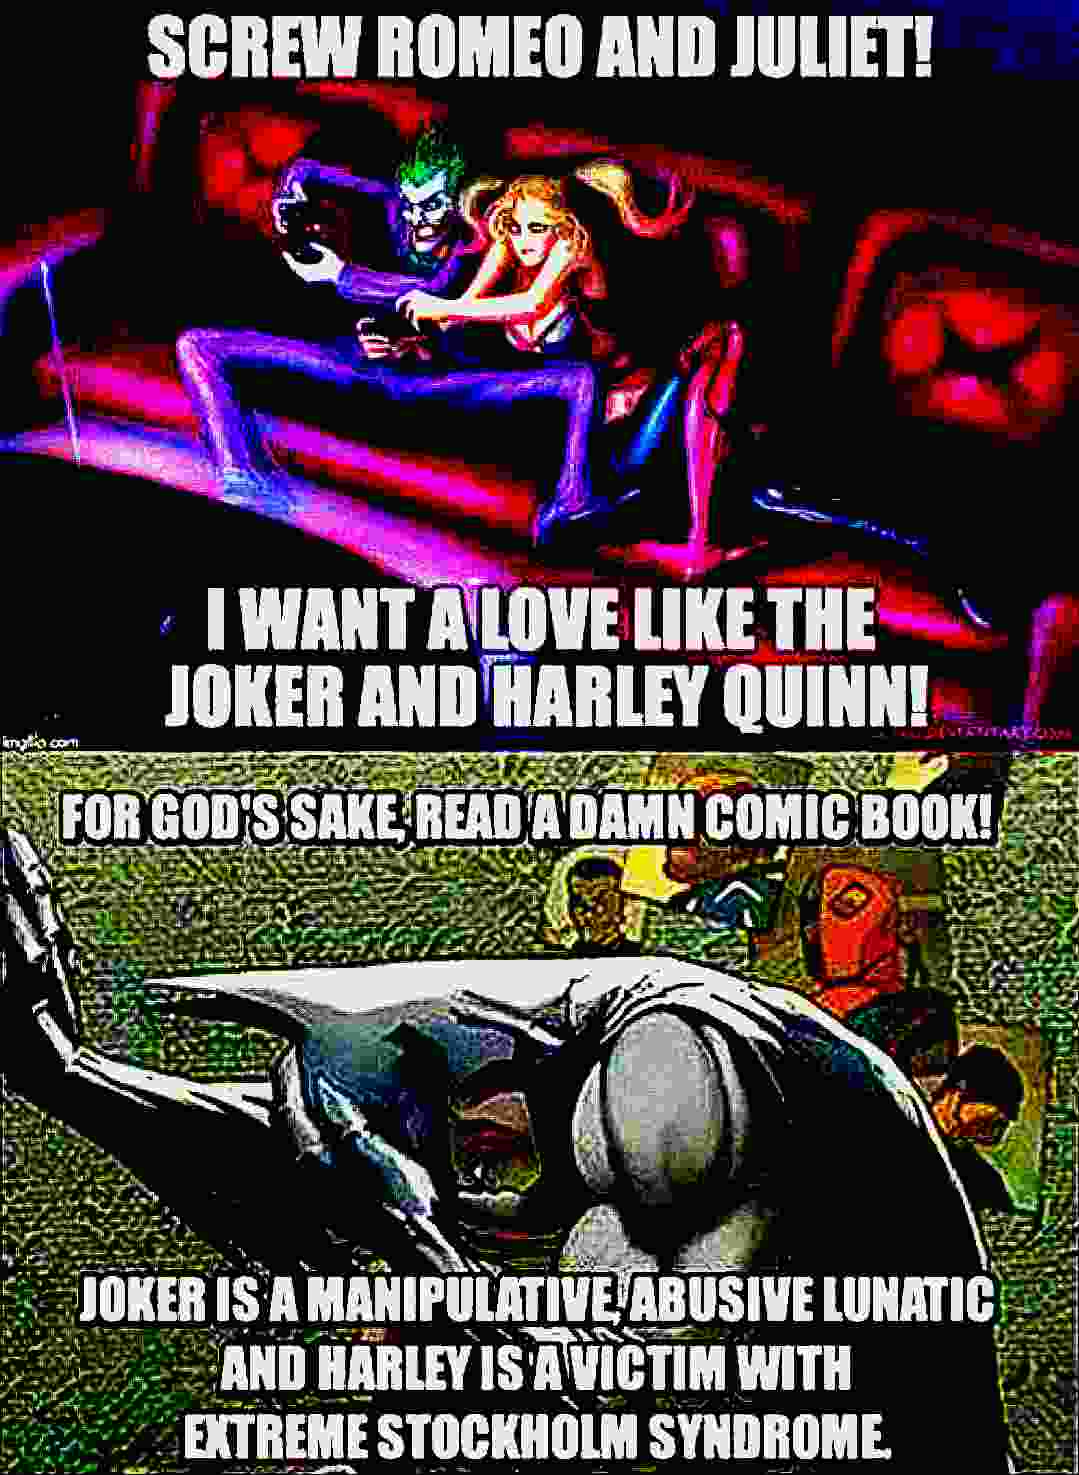 deep-fried deep-fried-memes deep-fried text: SCREW ROMEO JULIET! WANT A LOVE JOKER AND HARLEY FOR COMIC JOKER ISA ABUSIVE LUNATIC AND WITH STOCKHOLM SYNDROME 